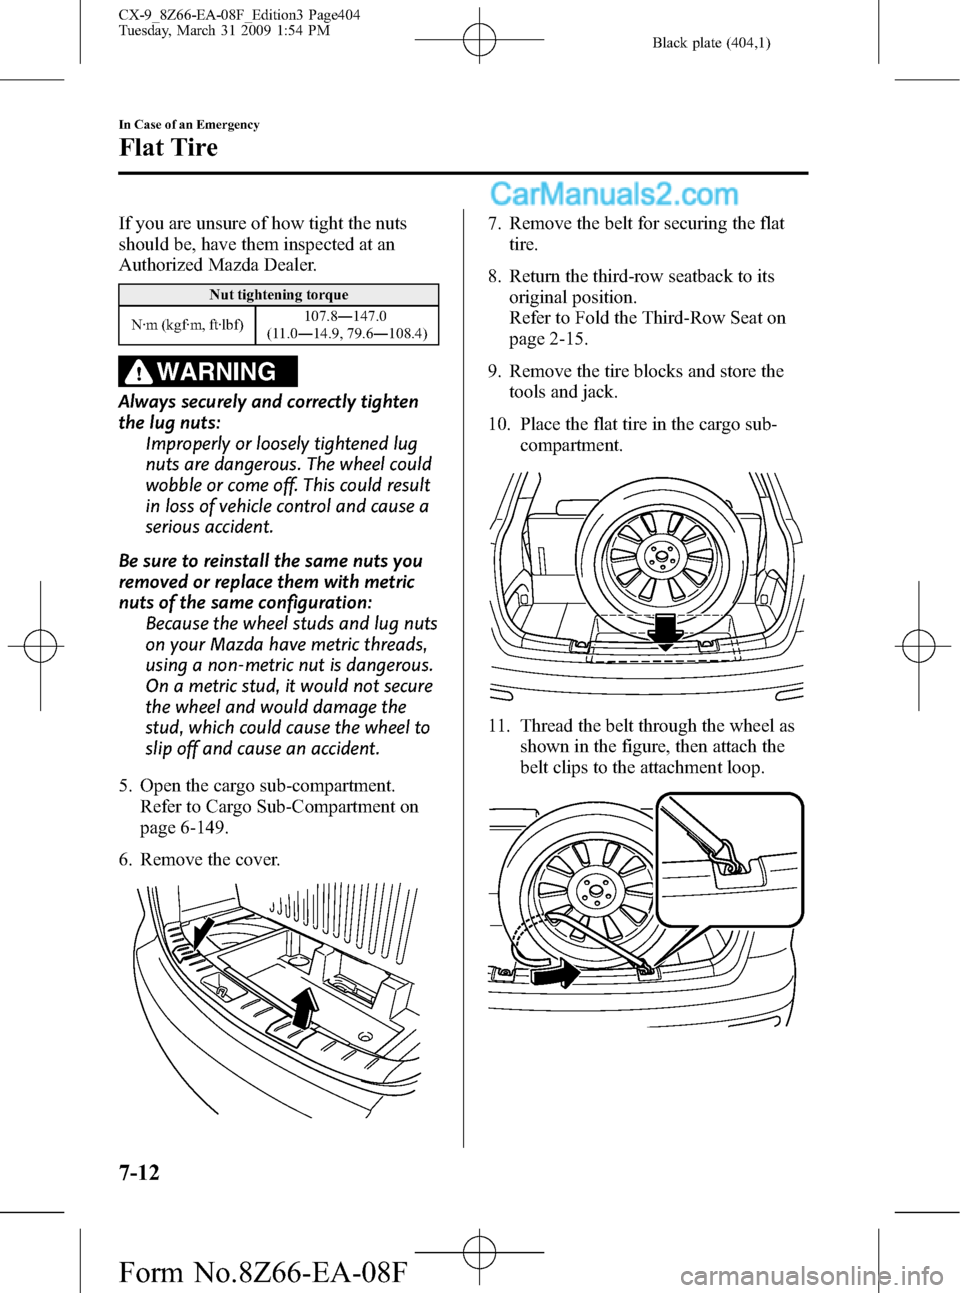 MAZDA MODEL CX-9 2009  Owners Manual (in English) Black plate (404,1)
If you are unsure of how tight the nuts
should be, have them inspected at an
Authorized Mazda Dealer.
Nut tightening torque
N·m (kgf·m, ft·lbf)107.8―147.0
(11.0―14.9, 79.6�